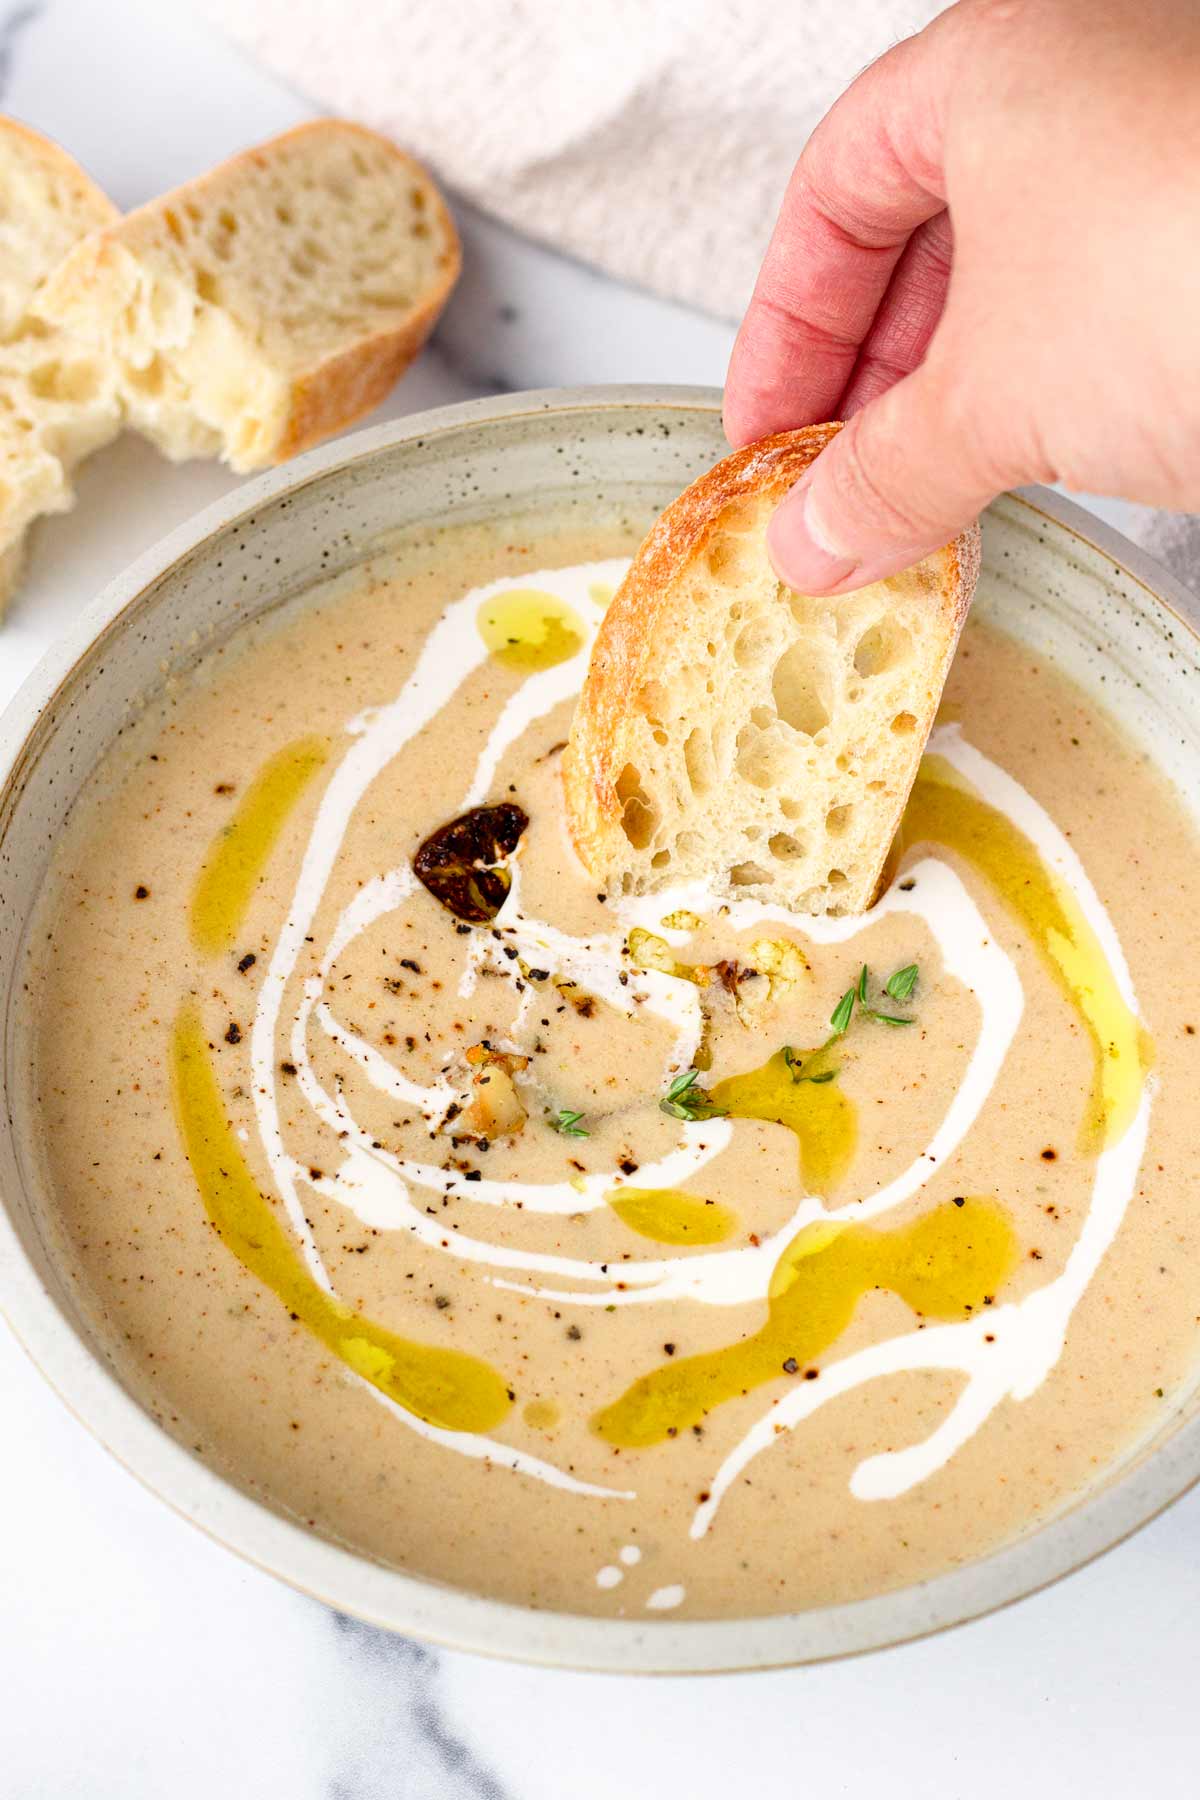 dipping toast into bowl of cauliflower soup